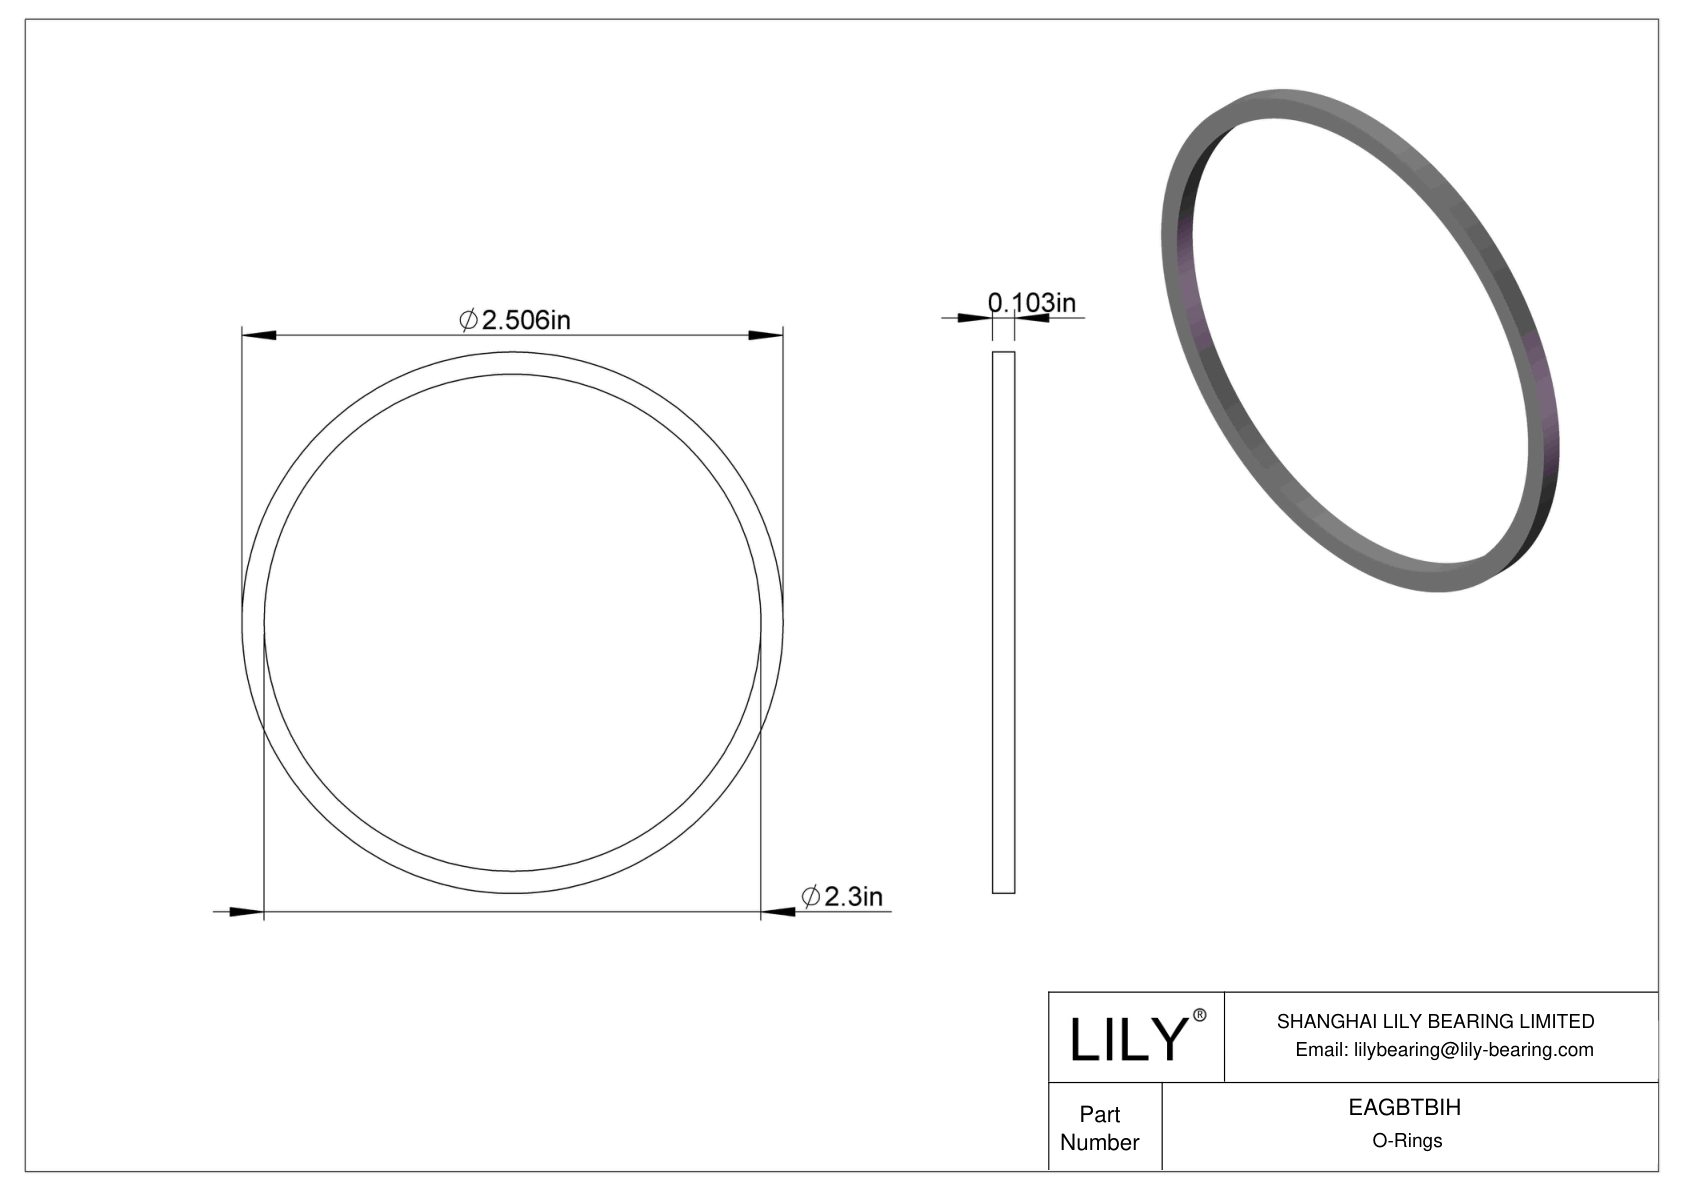 EAGBTBIH Oil Resistant O-Rings Square cad drawing